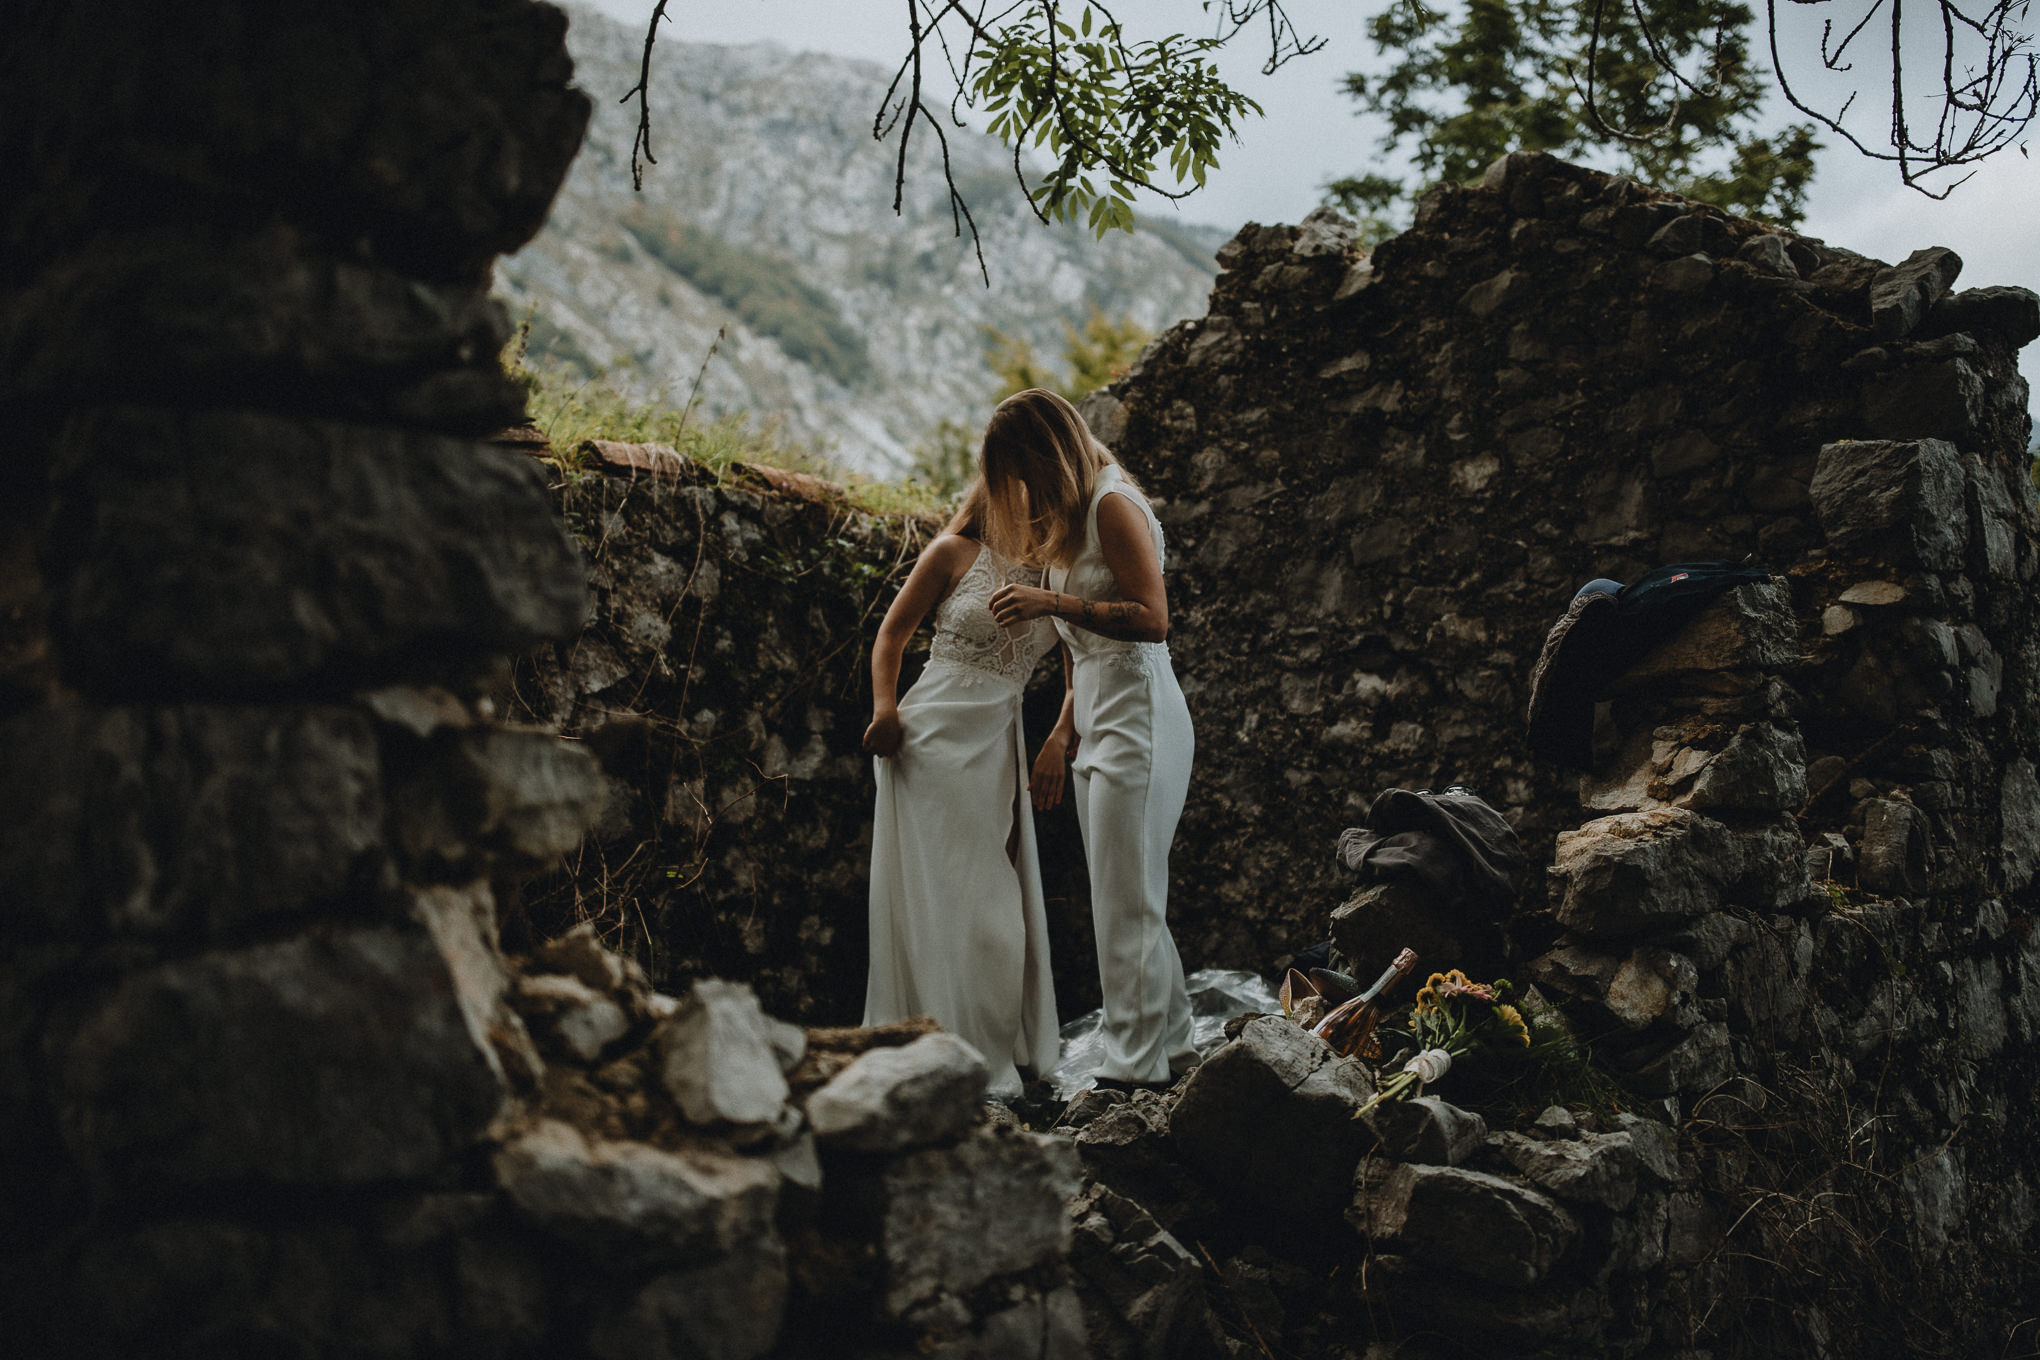 Two women get ready for their elopement in the Slovenian Alps in an abandoned stone hut